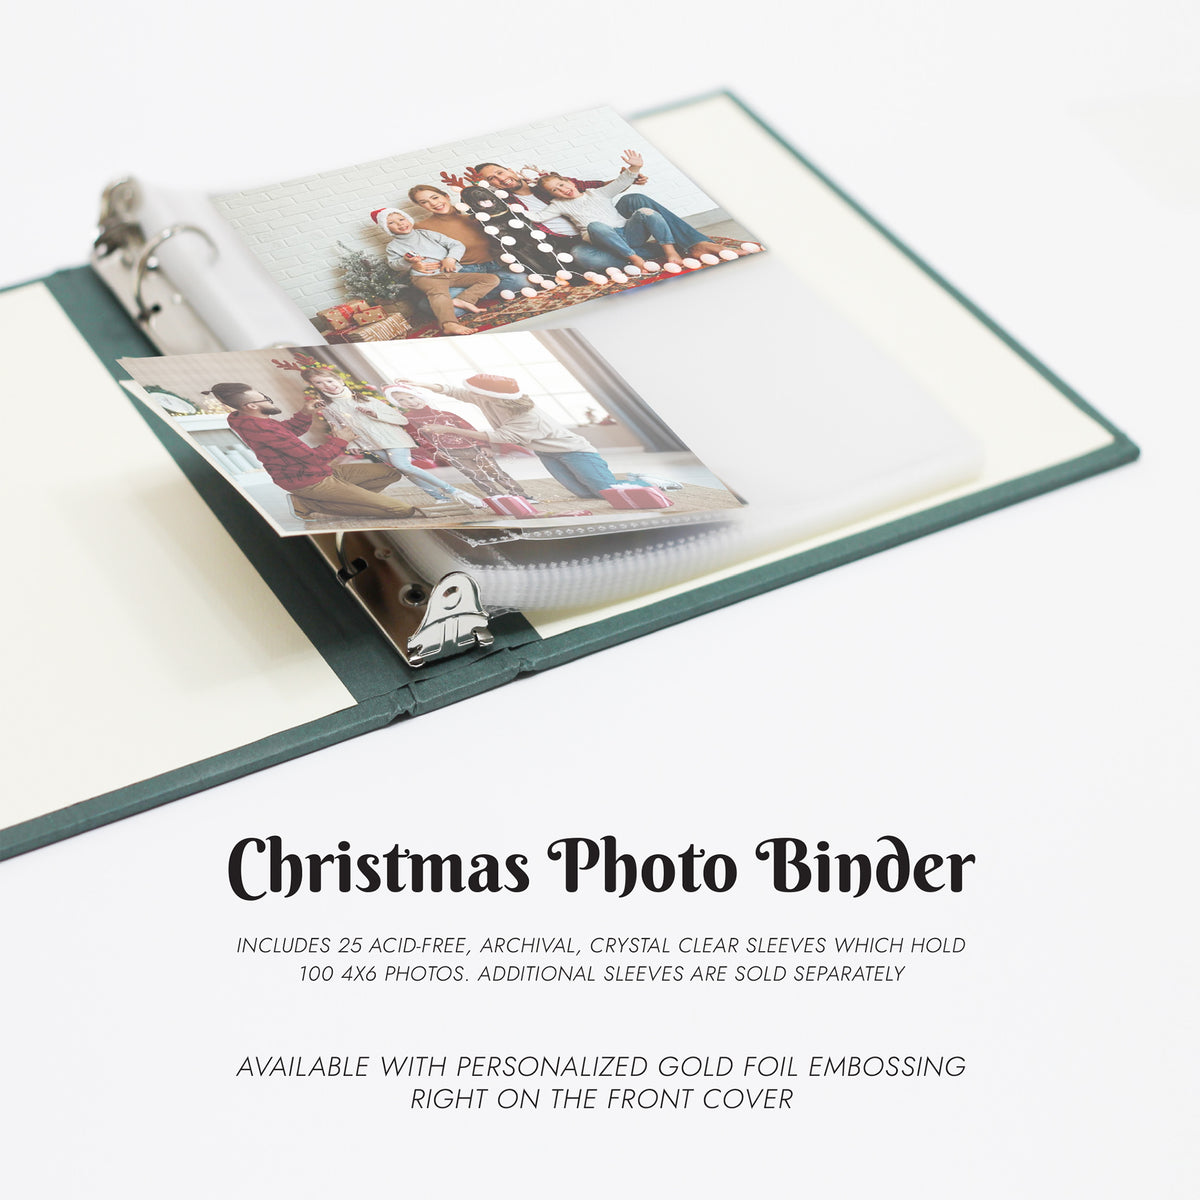 Medium Christmas Photo Binder with Red Vegan Leather Cover for 4x6 Photos